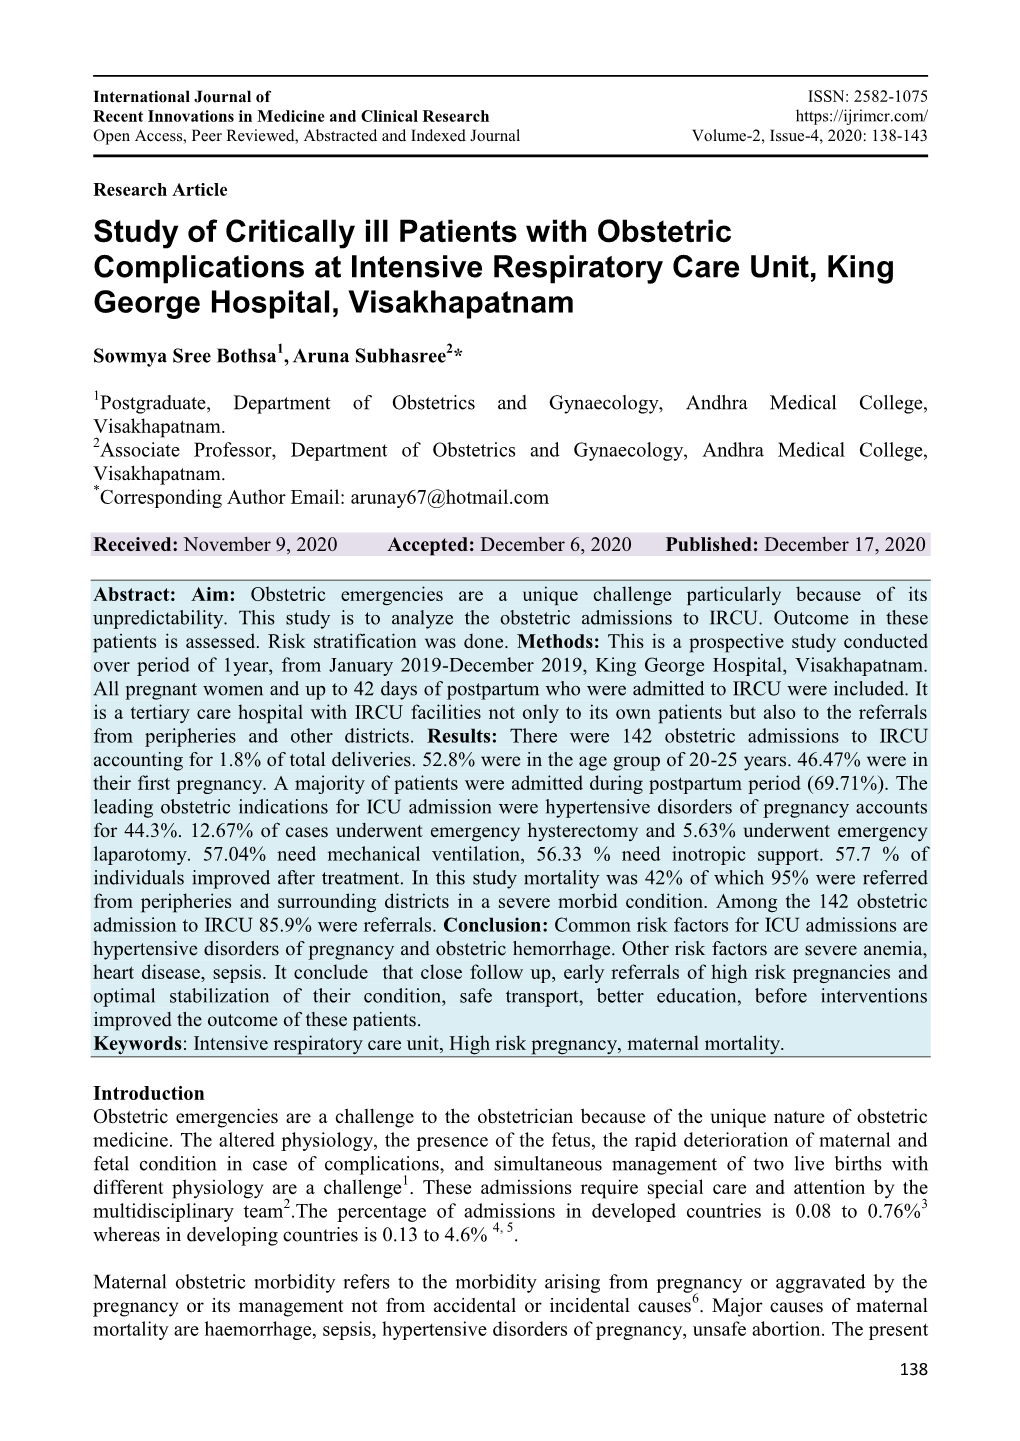 Study of Critically Ill Patients with Obstetric Complications at Intensive Respiratory Care Unit, King George Hospital, Visakhapatnam